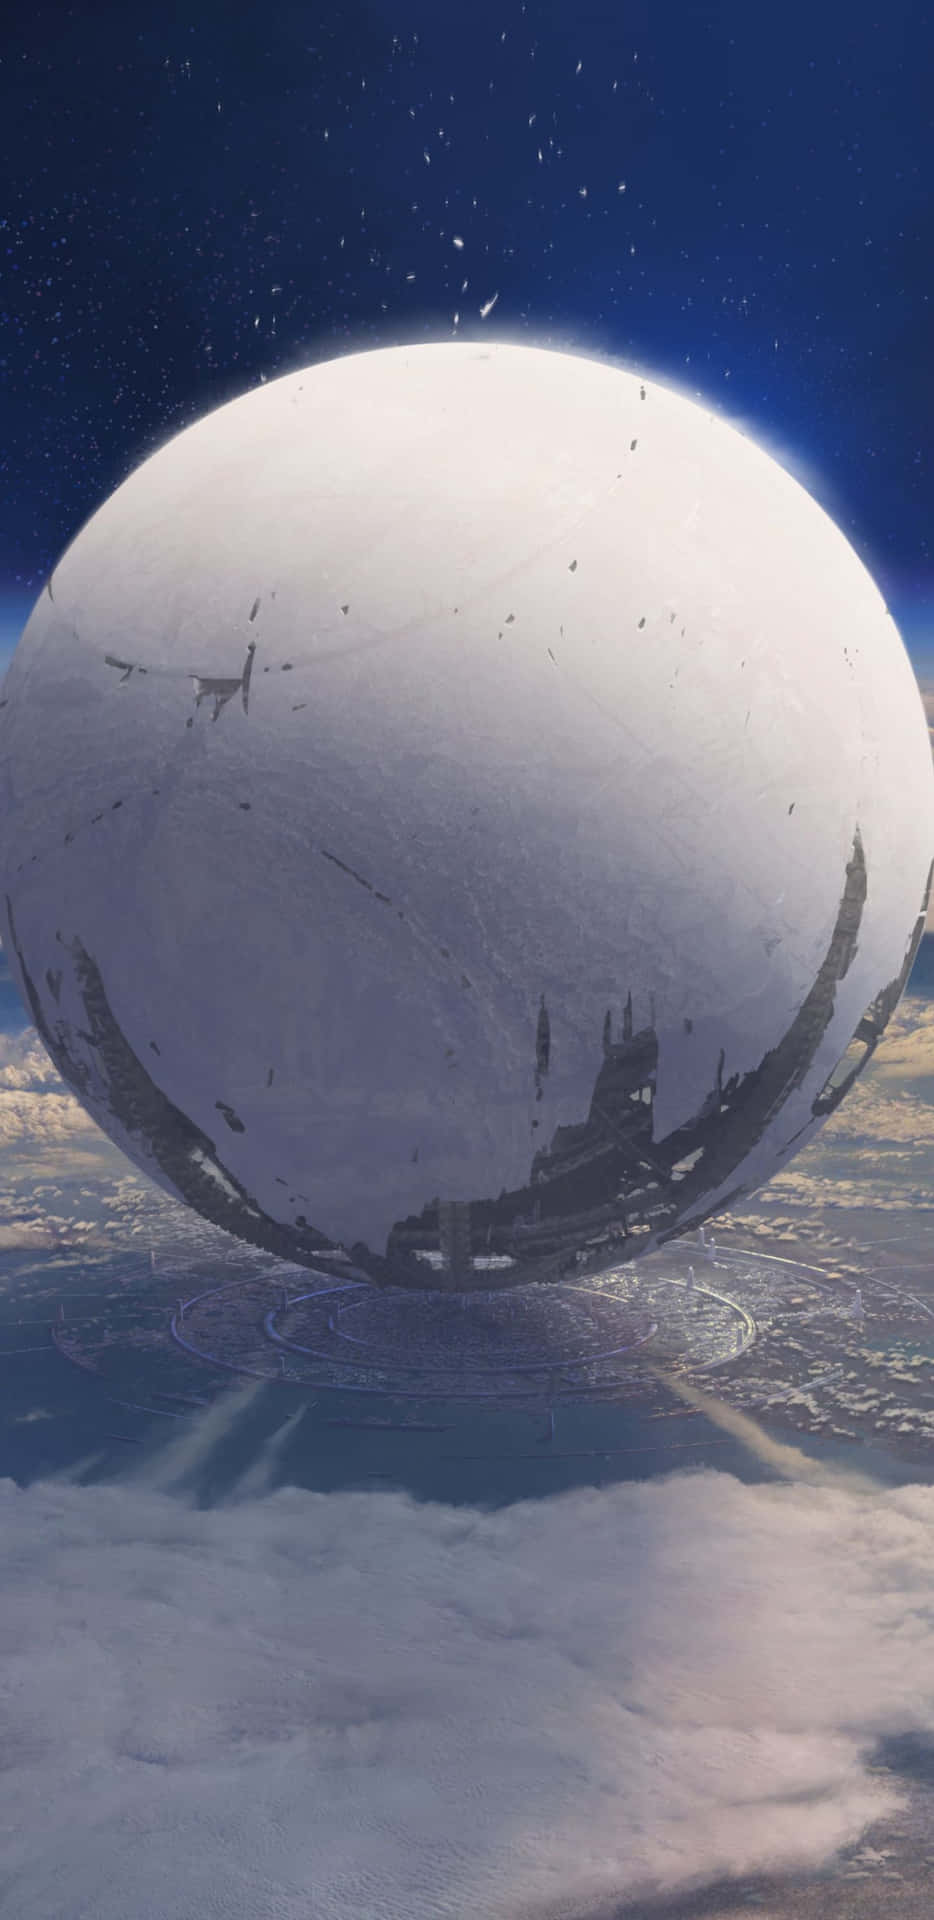 Pixel 3xl Destiny 2 Background And Shining Sphere